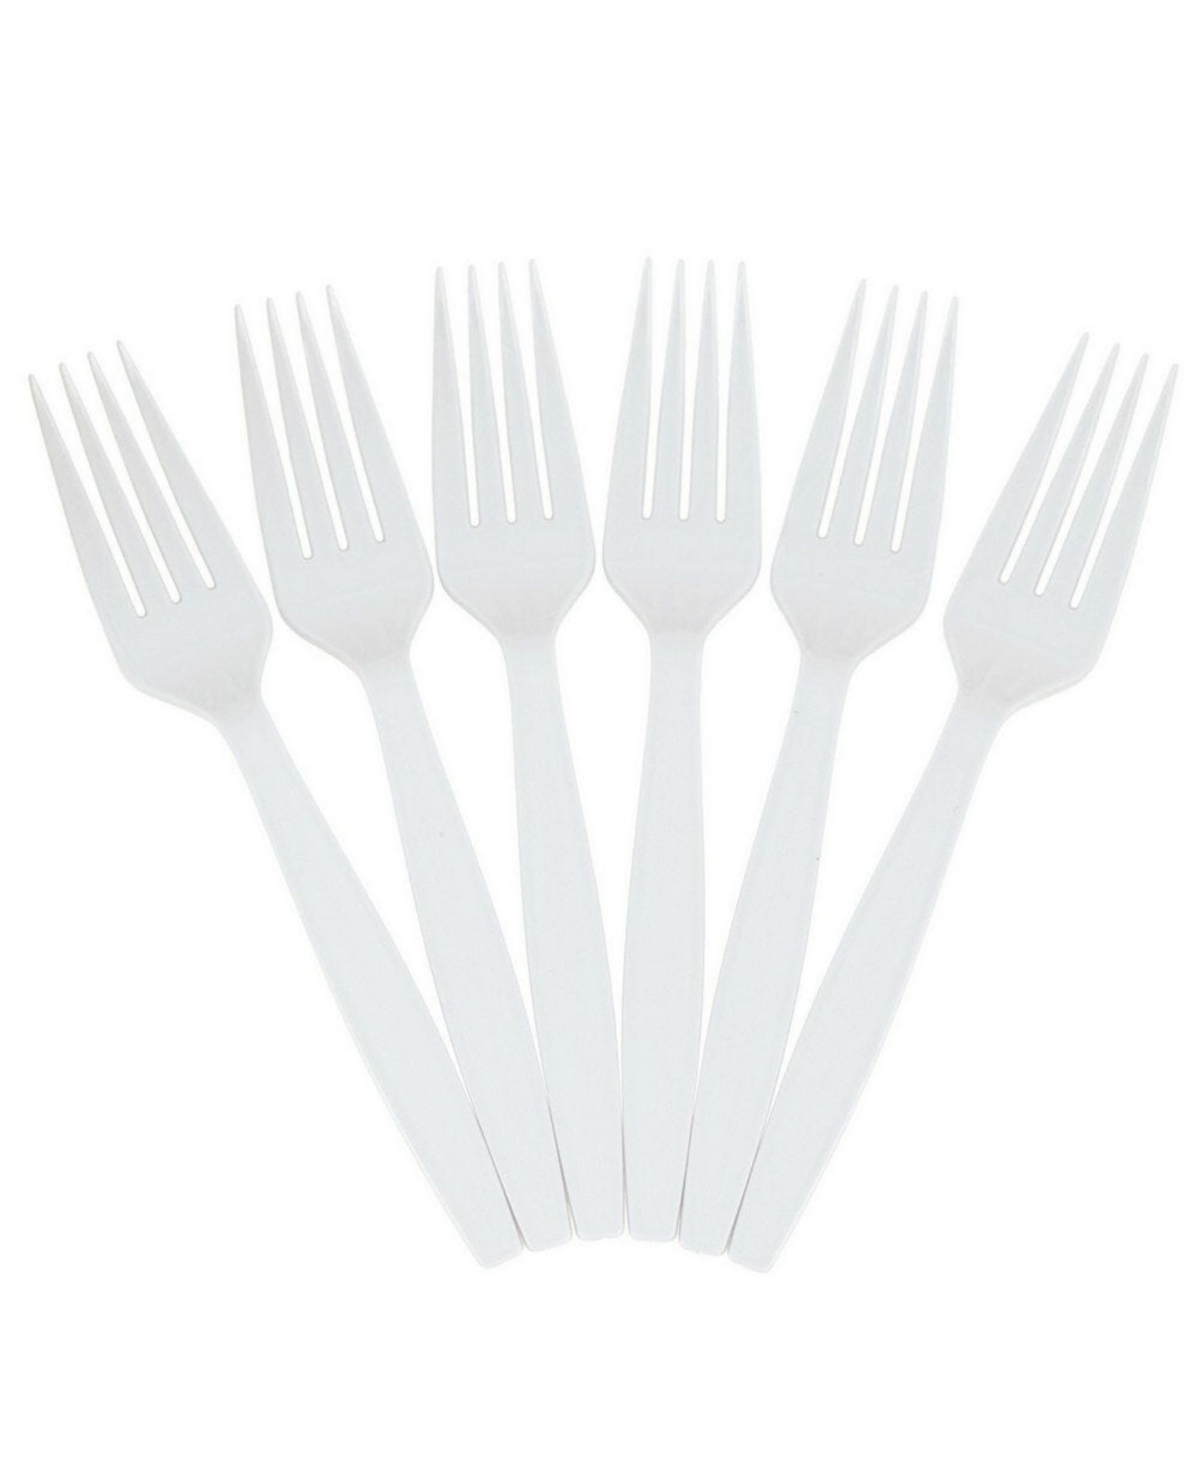 Jam Paper Big Party Pack Of Premium Plastic Forks In White